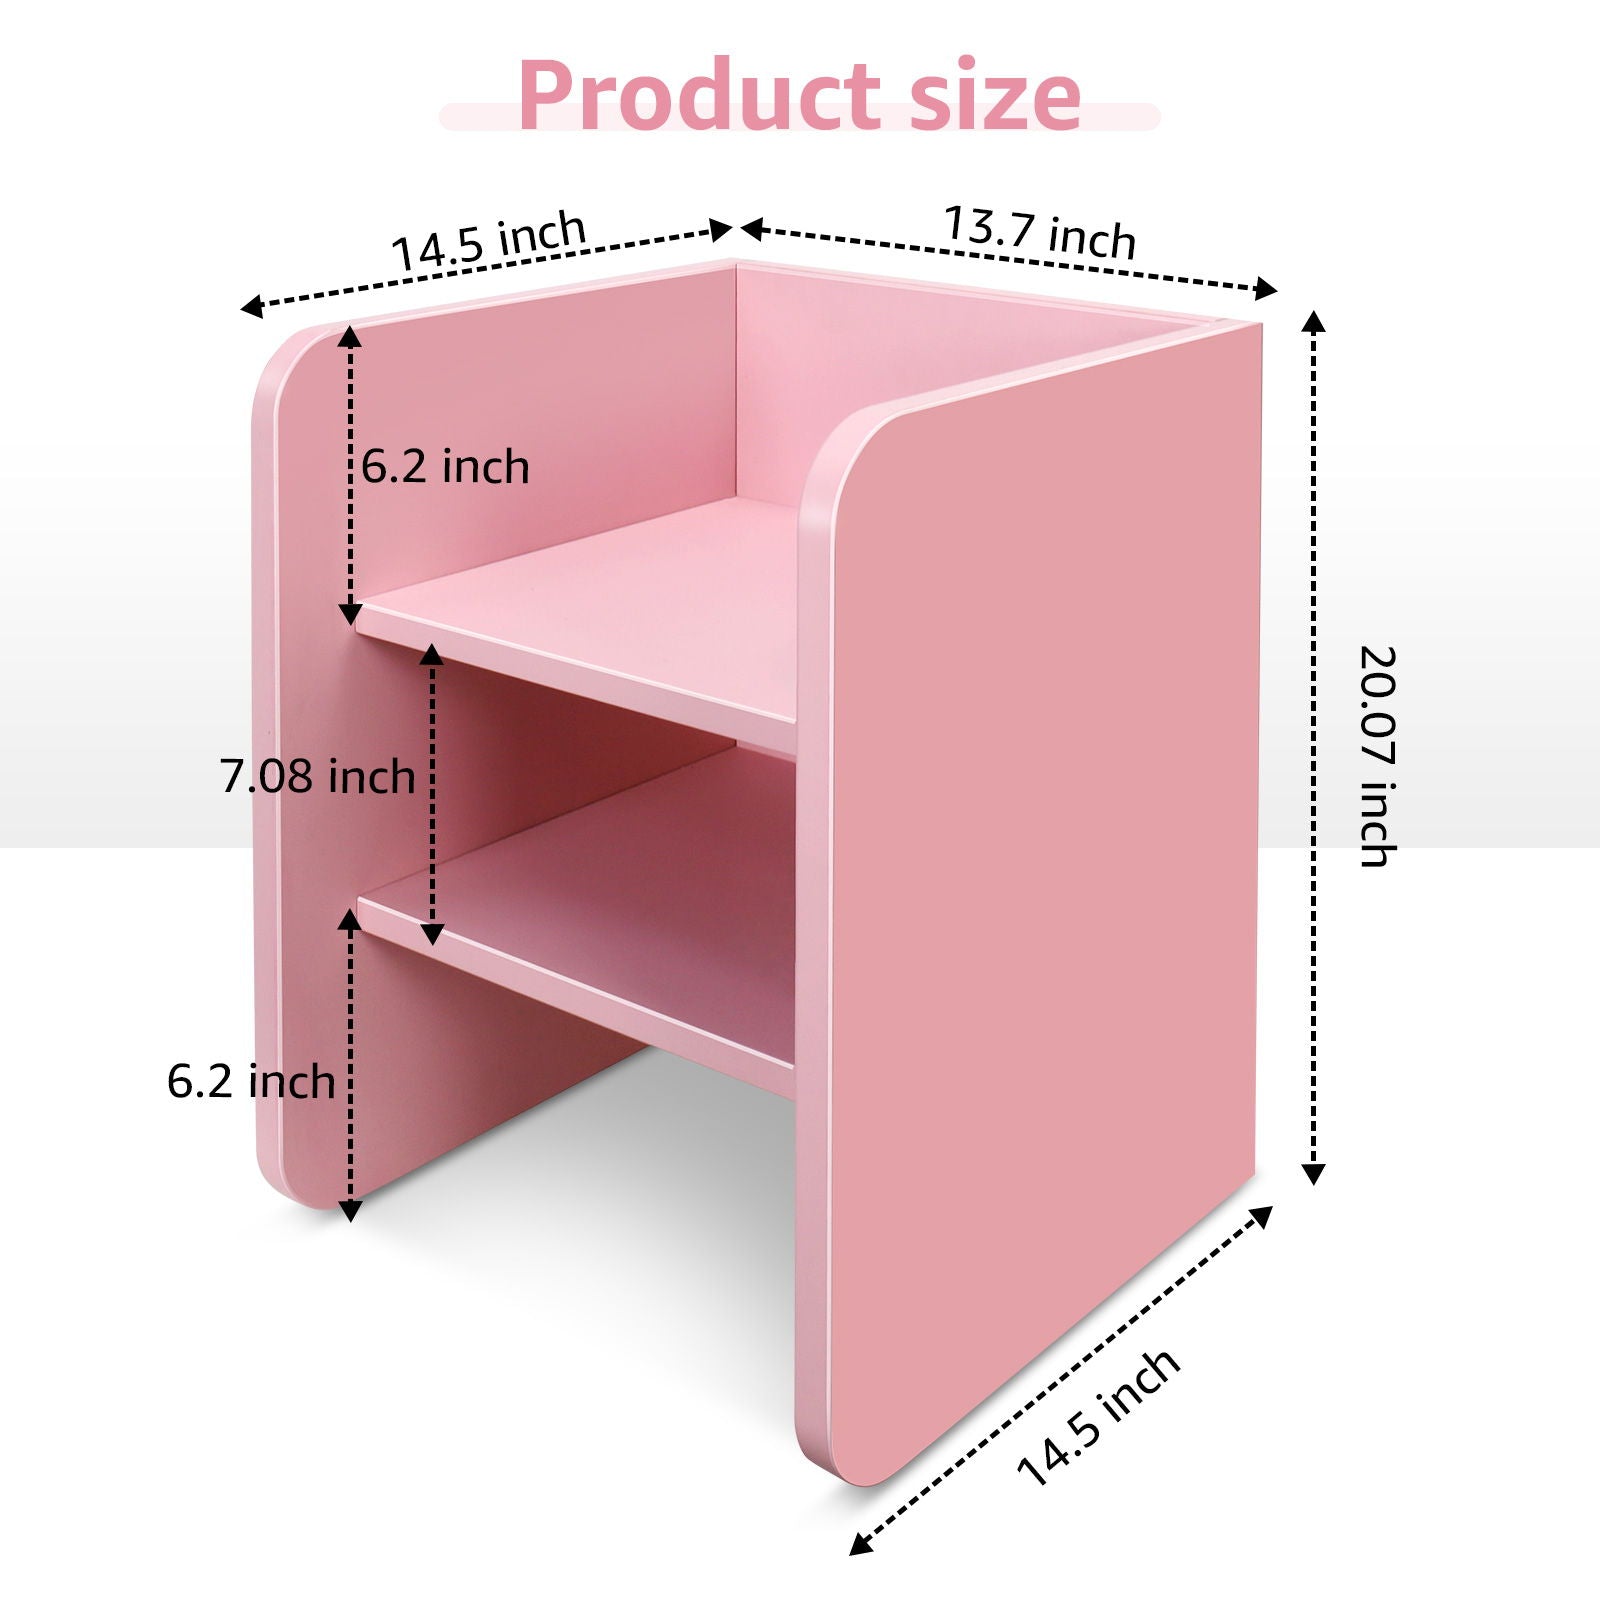 Multi-Functional Storage Cube, Highly Collocable End Table / Side Table / Night Stand / Bedside Table / Bookshelf And Stackable Organizer Display Shelf For Any Space, Carb Certified Non - Toxic (Pink)